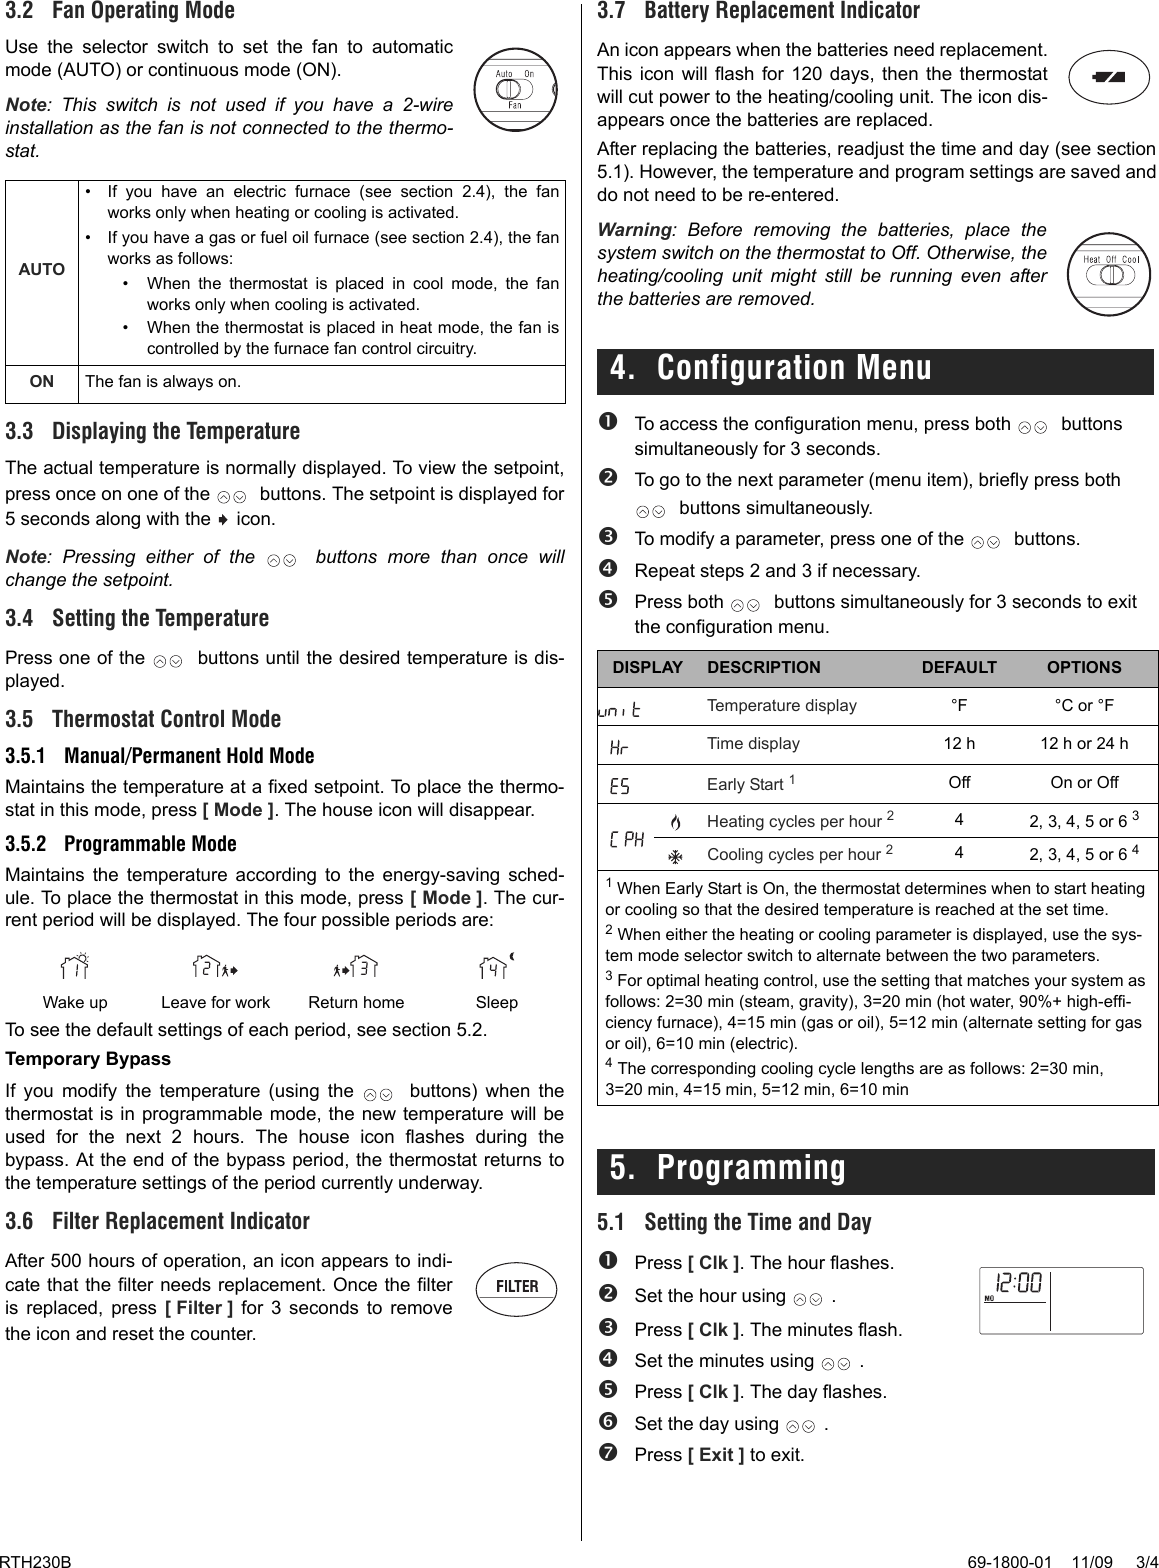 Page 3 of 4 - Honeywell Honeywell-Honeywell-Thermostat-Rth230B-Users-Manual- 69-1800 RTH230B Programmable Electronic Thermostat Installation And User Guide  Honeywell-honeywell-thermostat-rth230b-users-manual